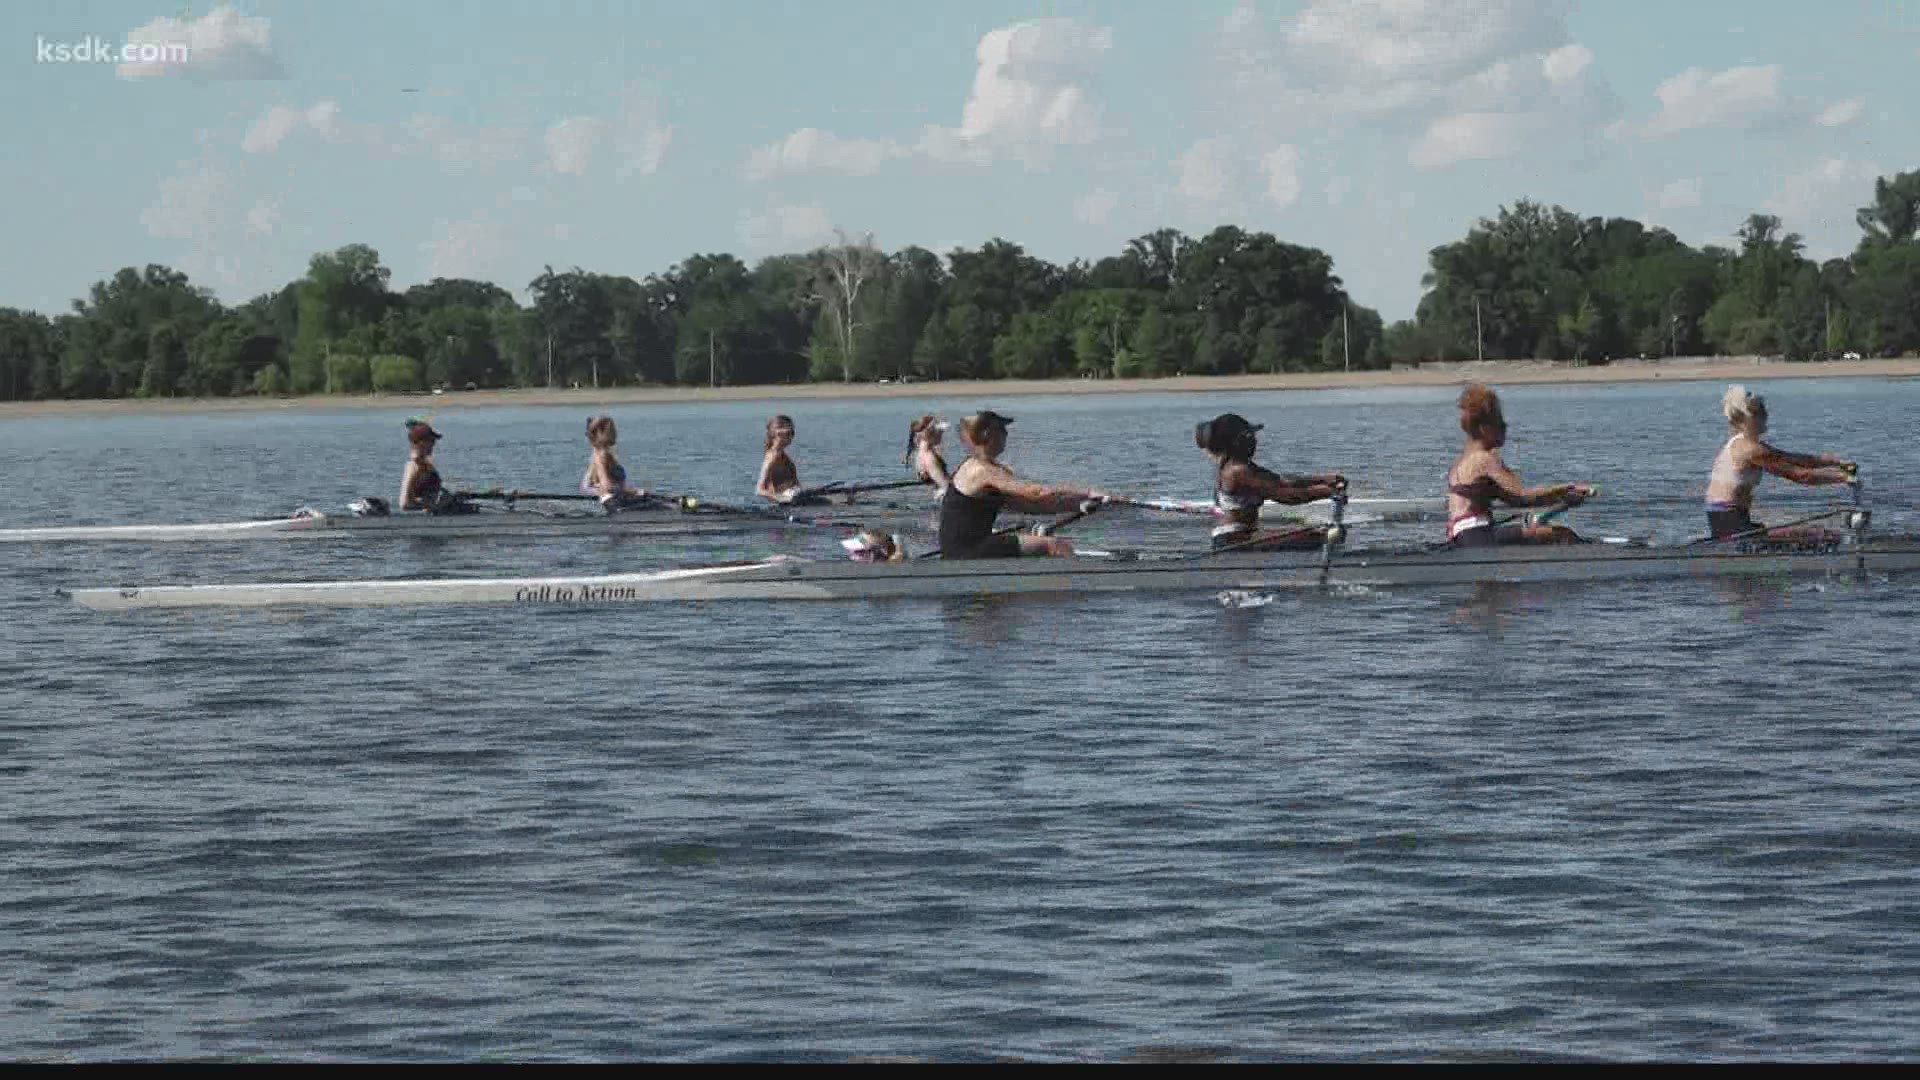 “Most clubs are coming from the northeast and the west and nobody really expects St. Louis Rowing Club to be that high in the rankings, but we hold our own."